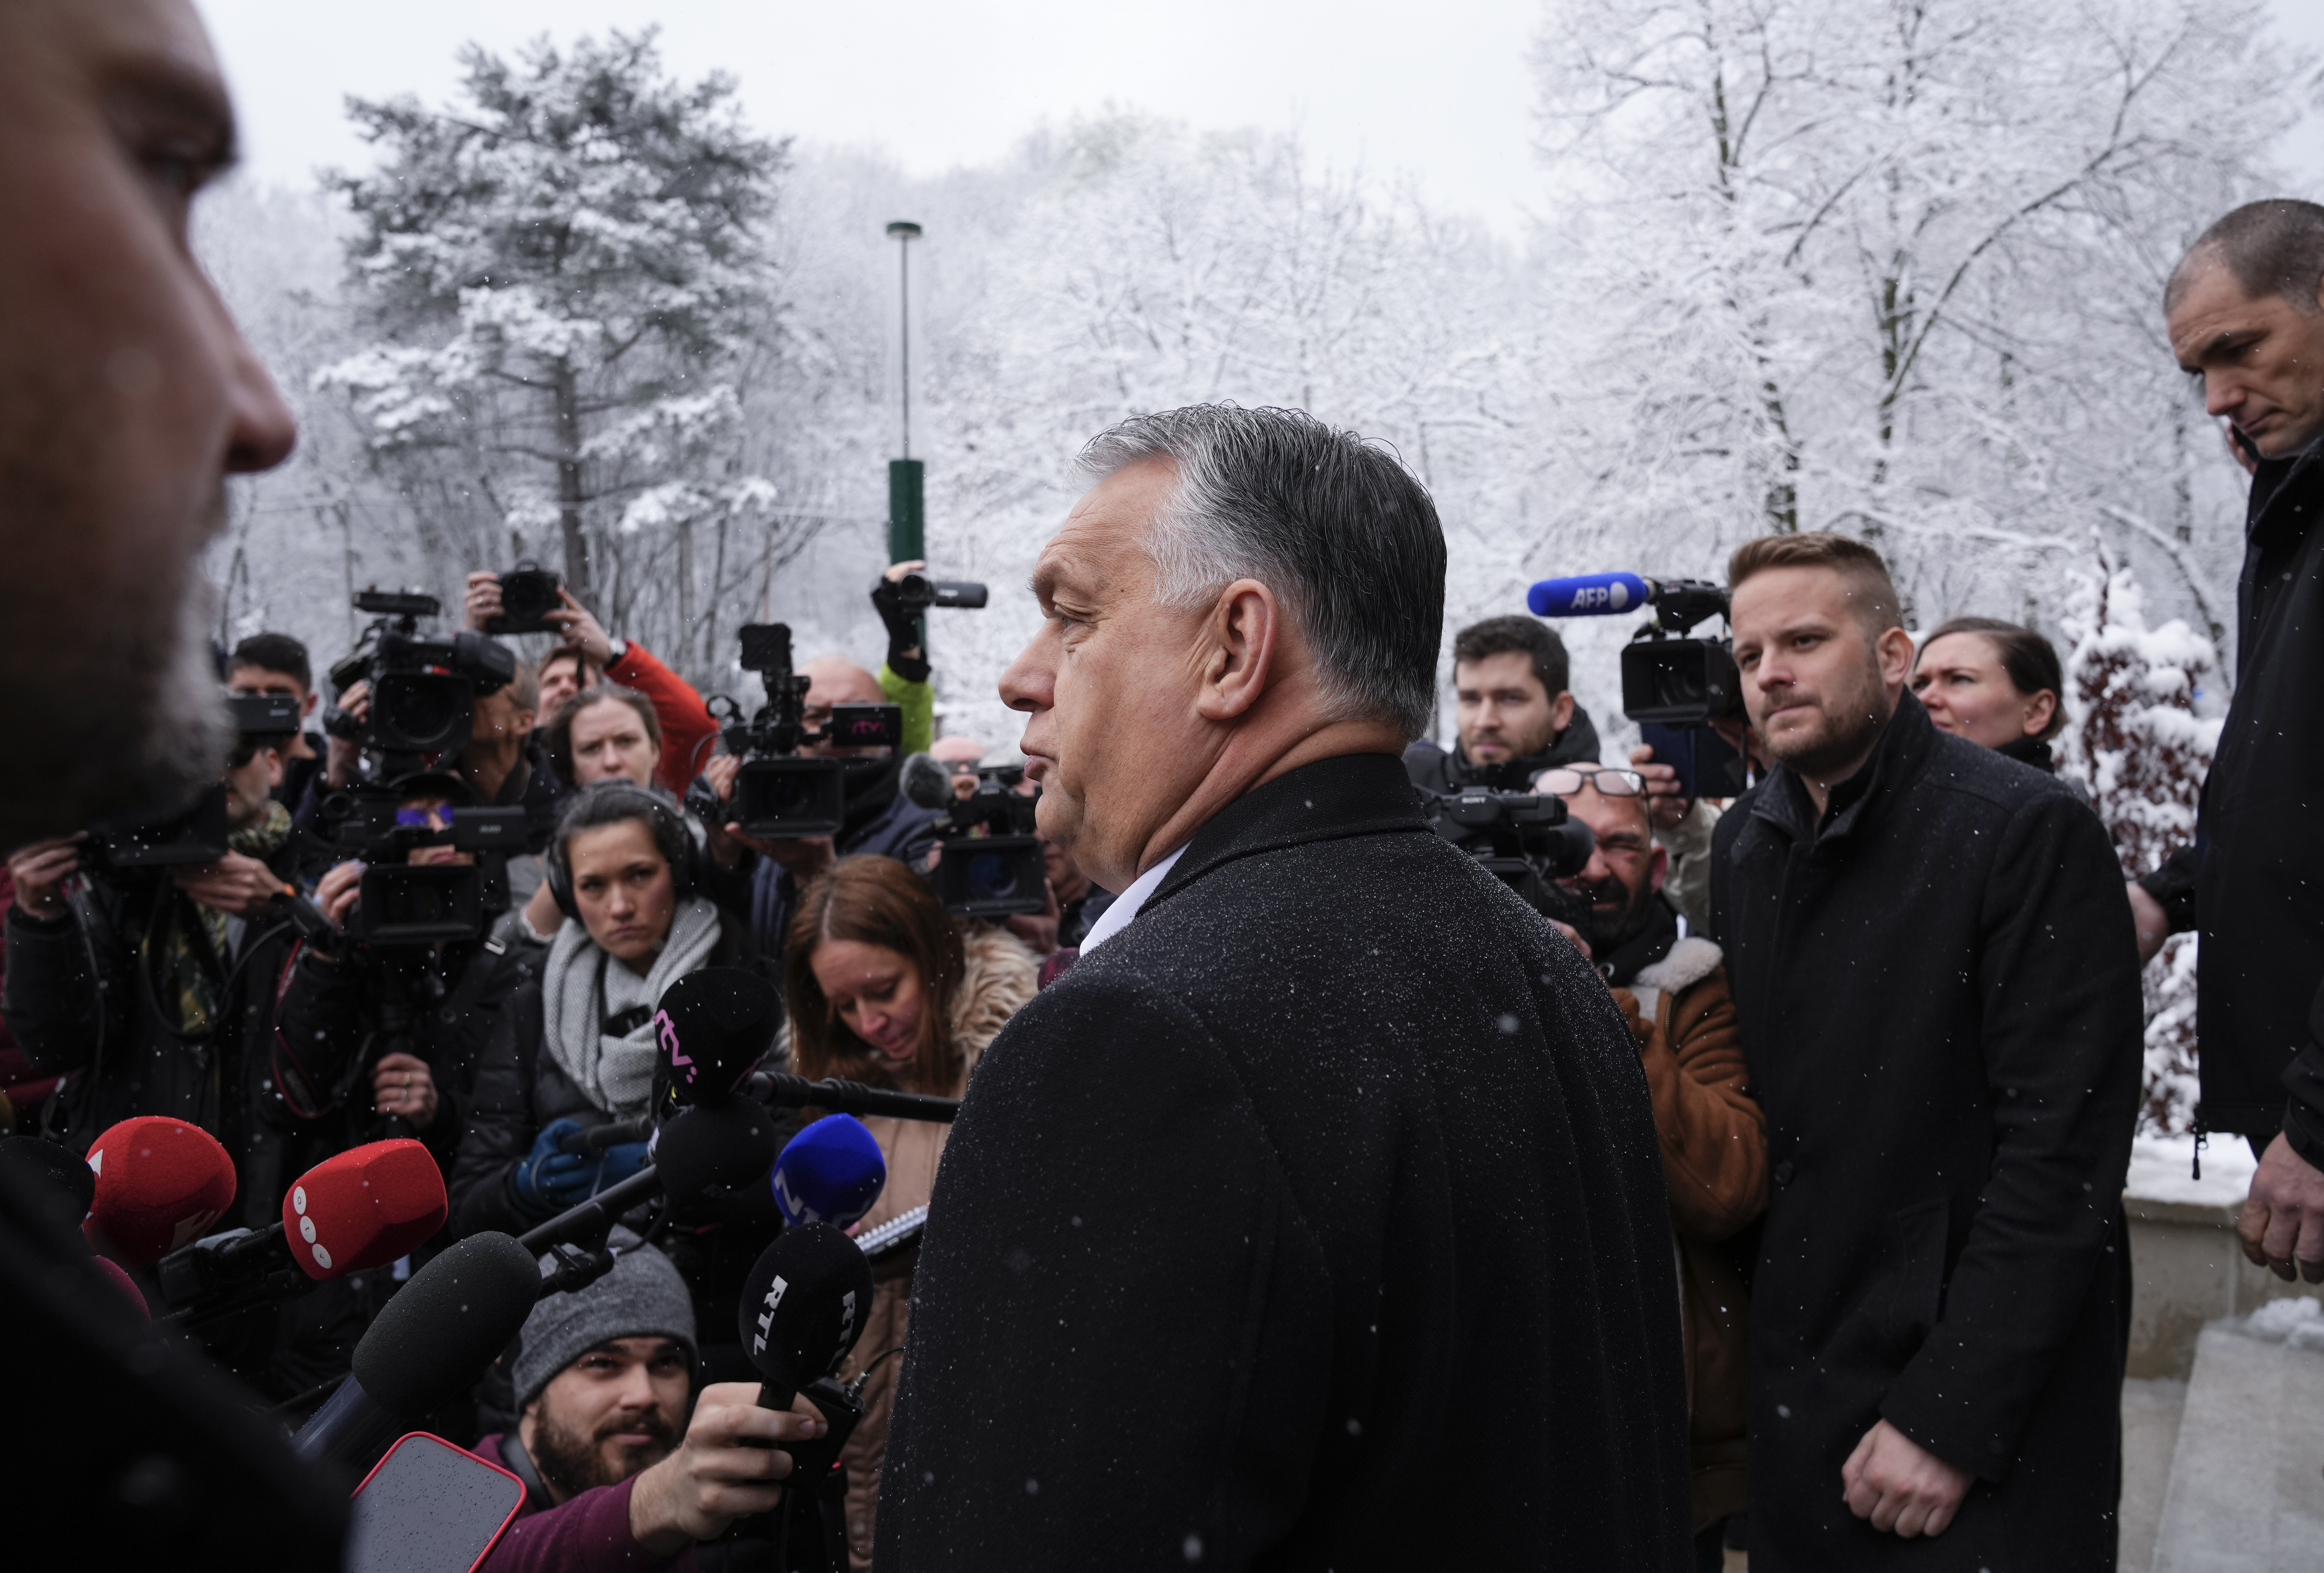 Hungary's nationalist prime minister Viktor Orbán, center, talks to the media after casting his vote in the general election in Budapest, Hungary, April 3, 2022